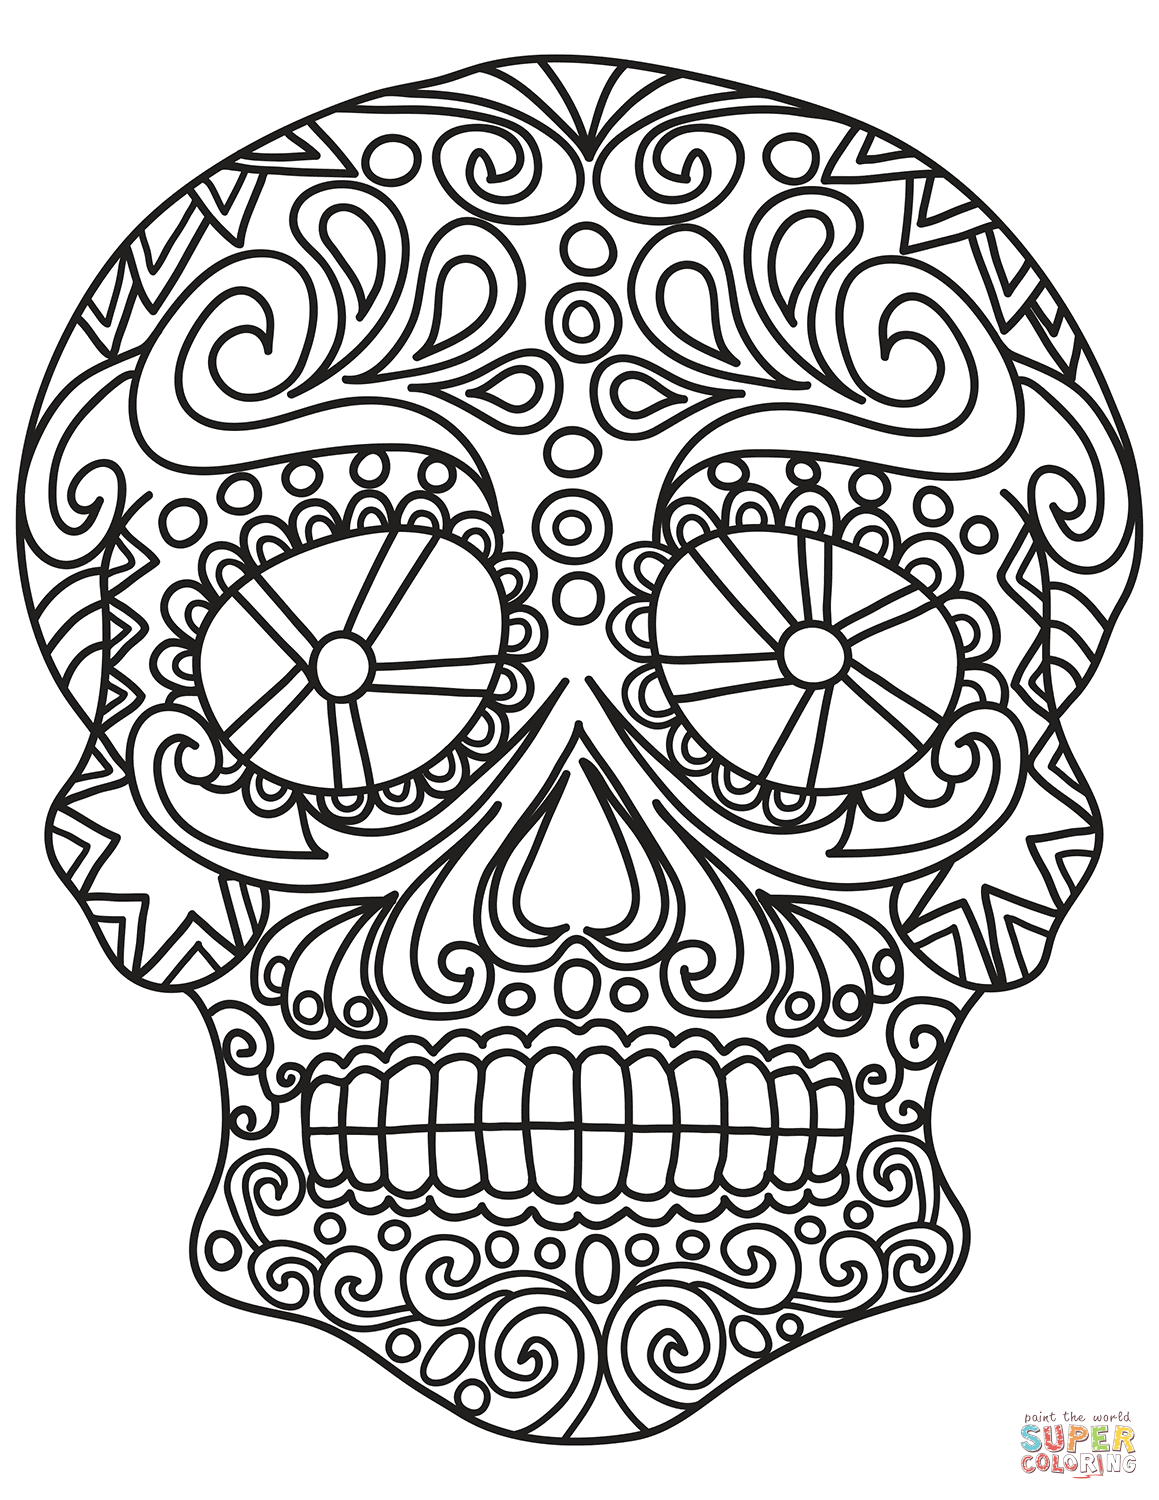 Pop art sugar skull coloring page free printable coloring pages